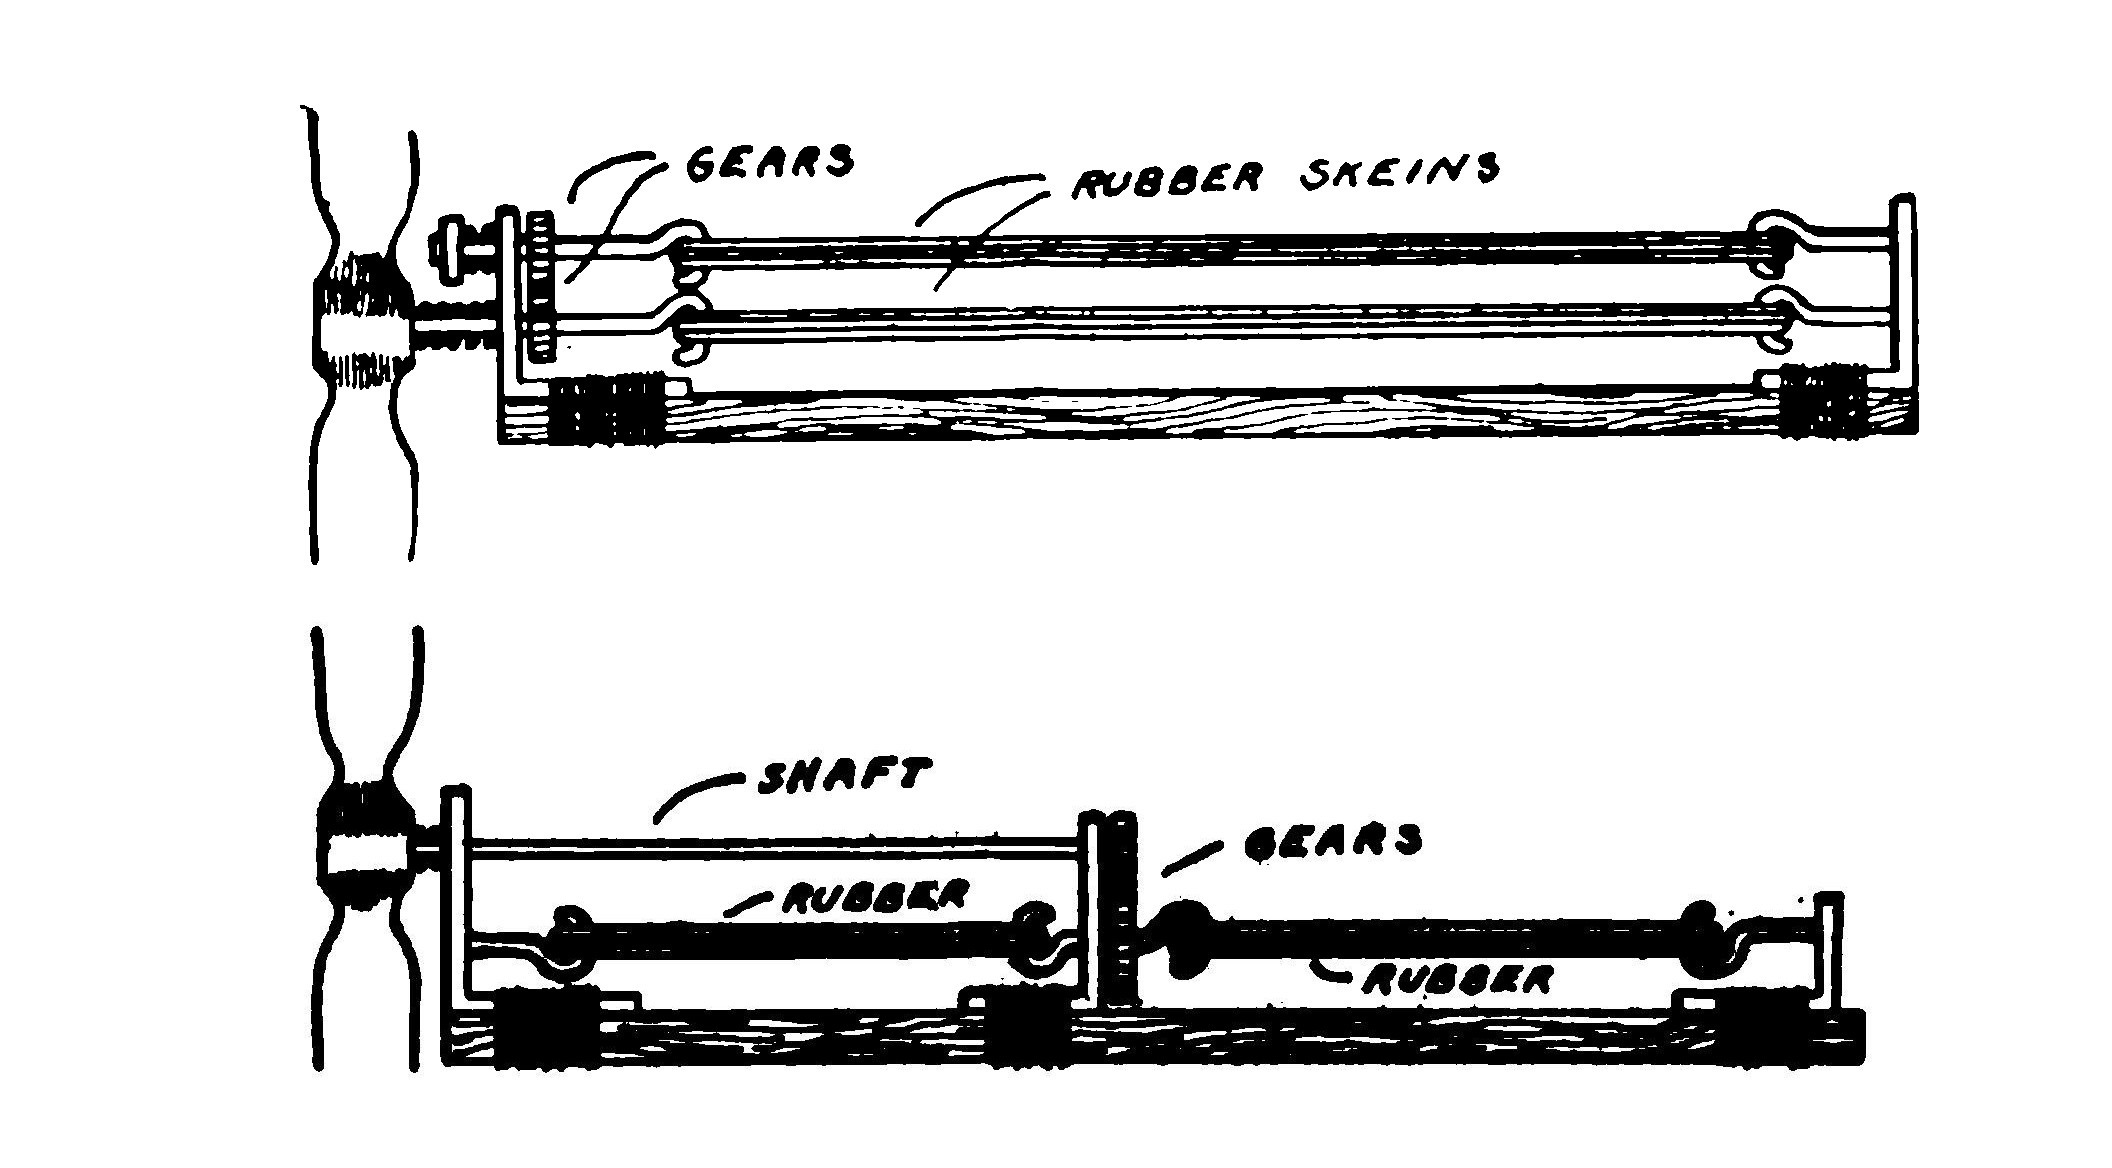 FIG. 23. Two methods of gearing a propeller.